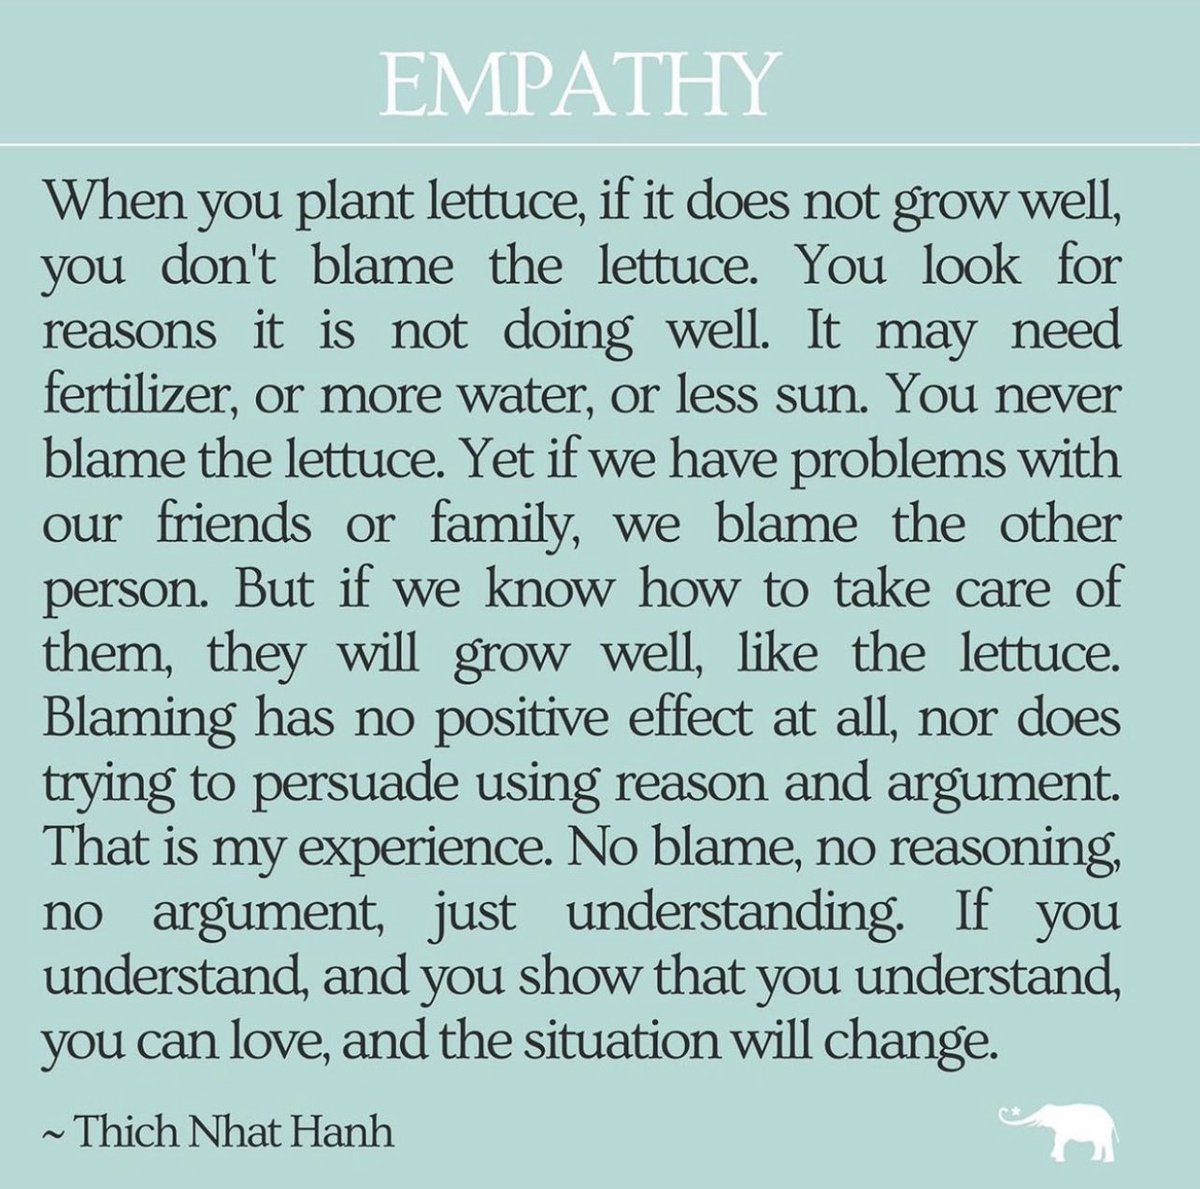 🌍💙 Let's cultivate empathy, the key 🔑 to understanding & connecting with others. Taking responsibility for our own actions empowers personal growth & fosters a positive mindset, freeing us from the detrimental habit of blaming others. #EmpathyMatters #InclusiveWorld